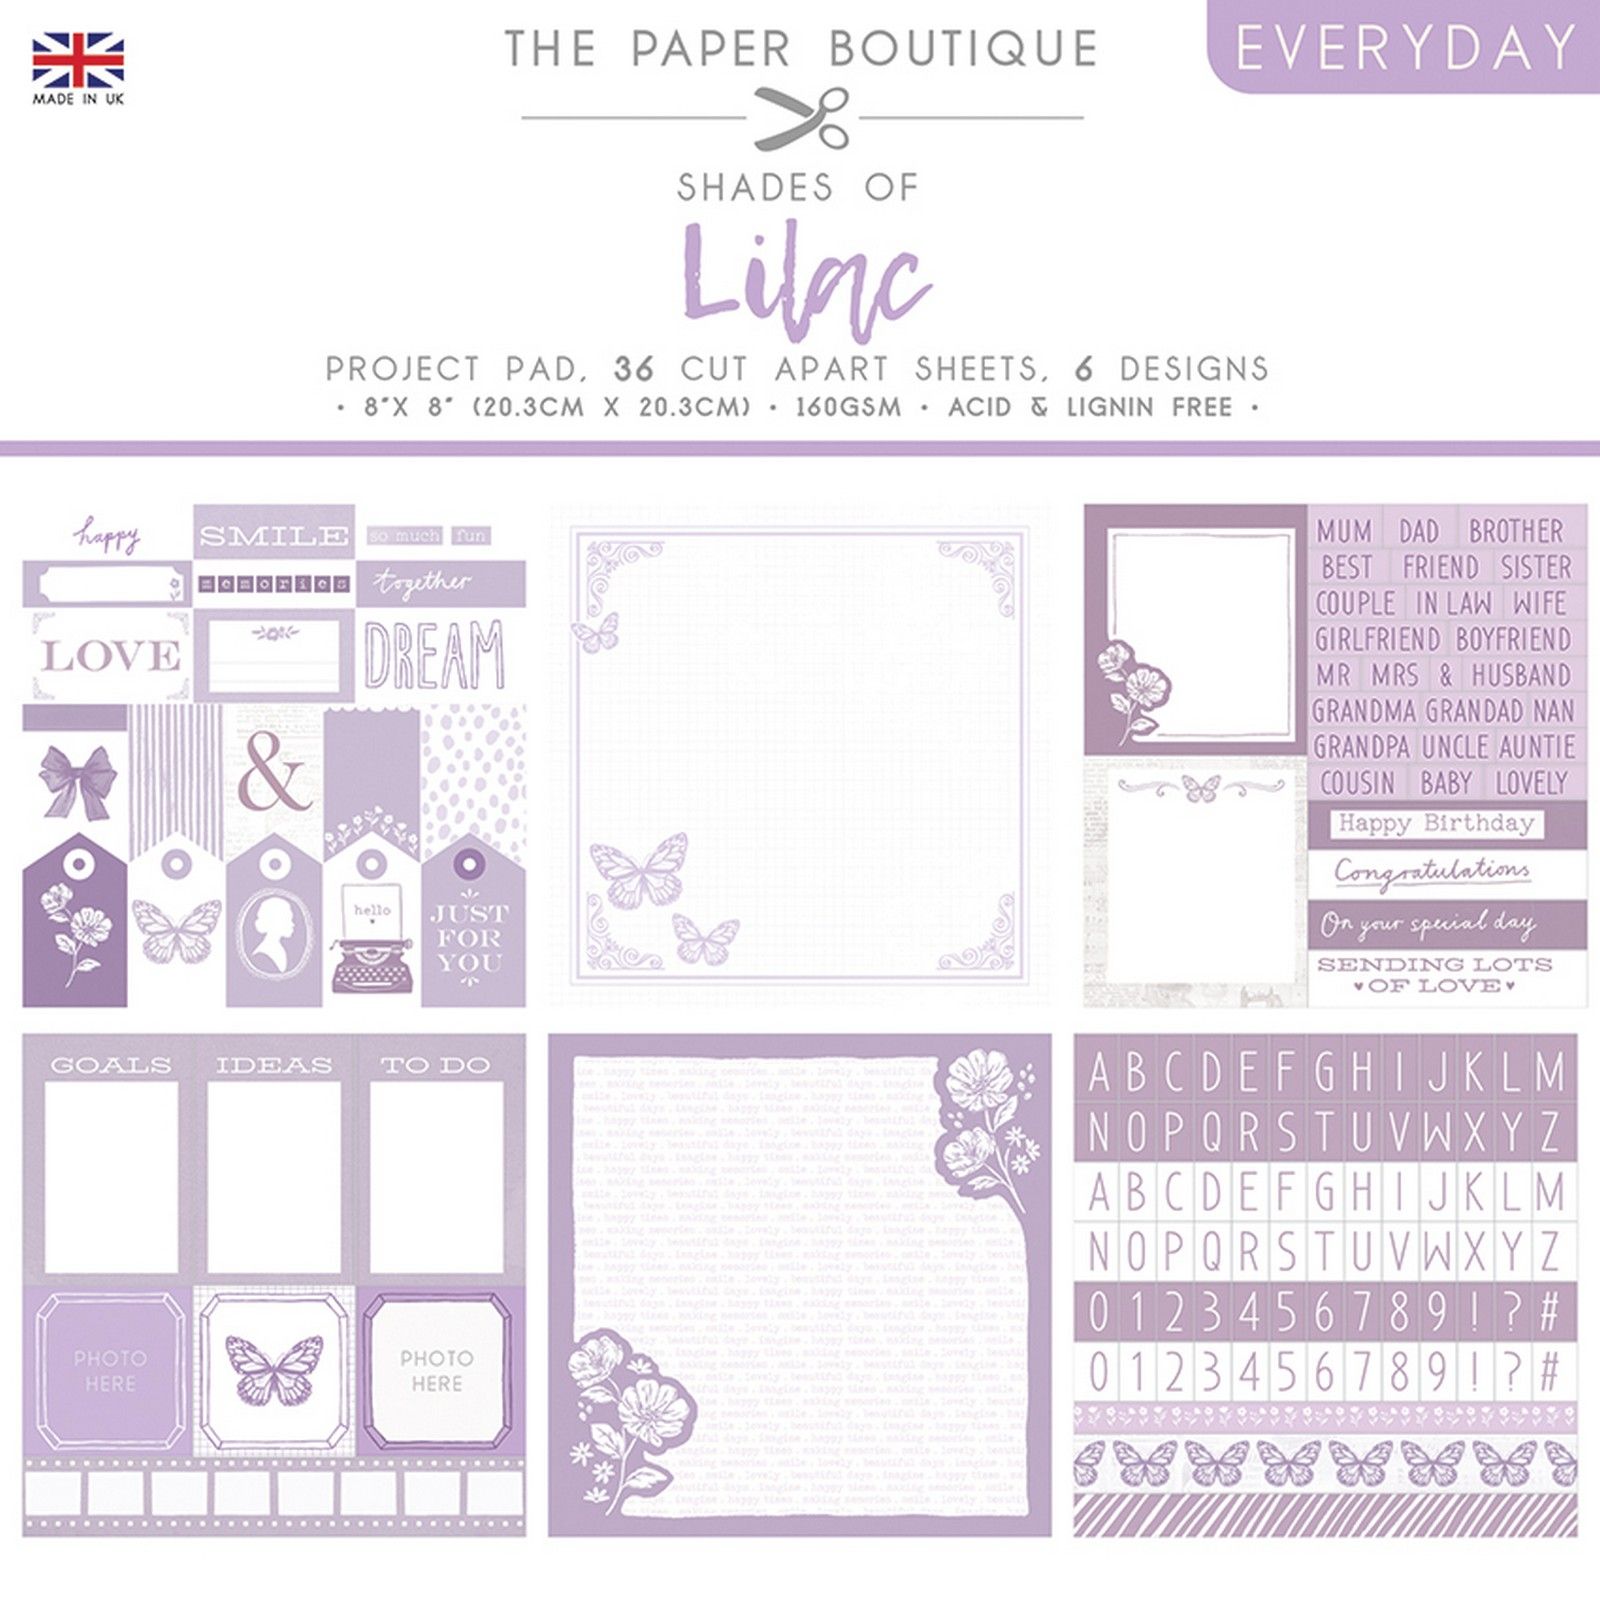 The Paper Boutique • Everyday shades of Lilac project pad